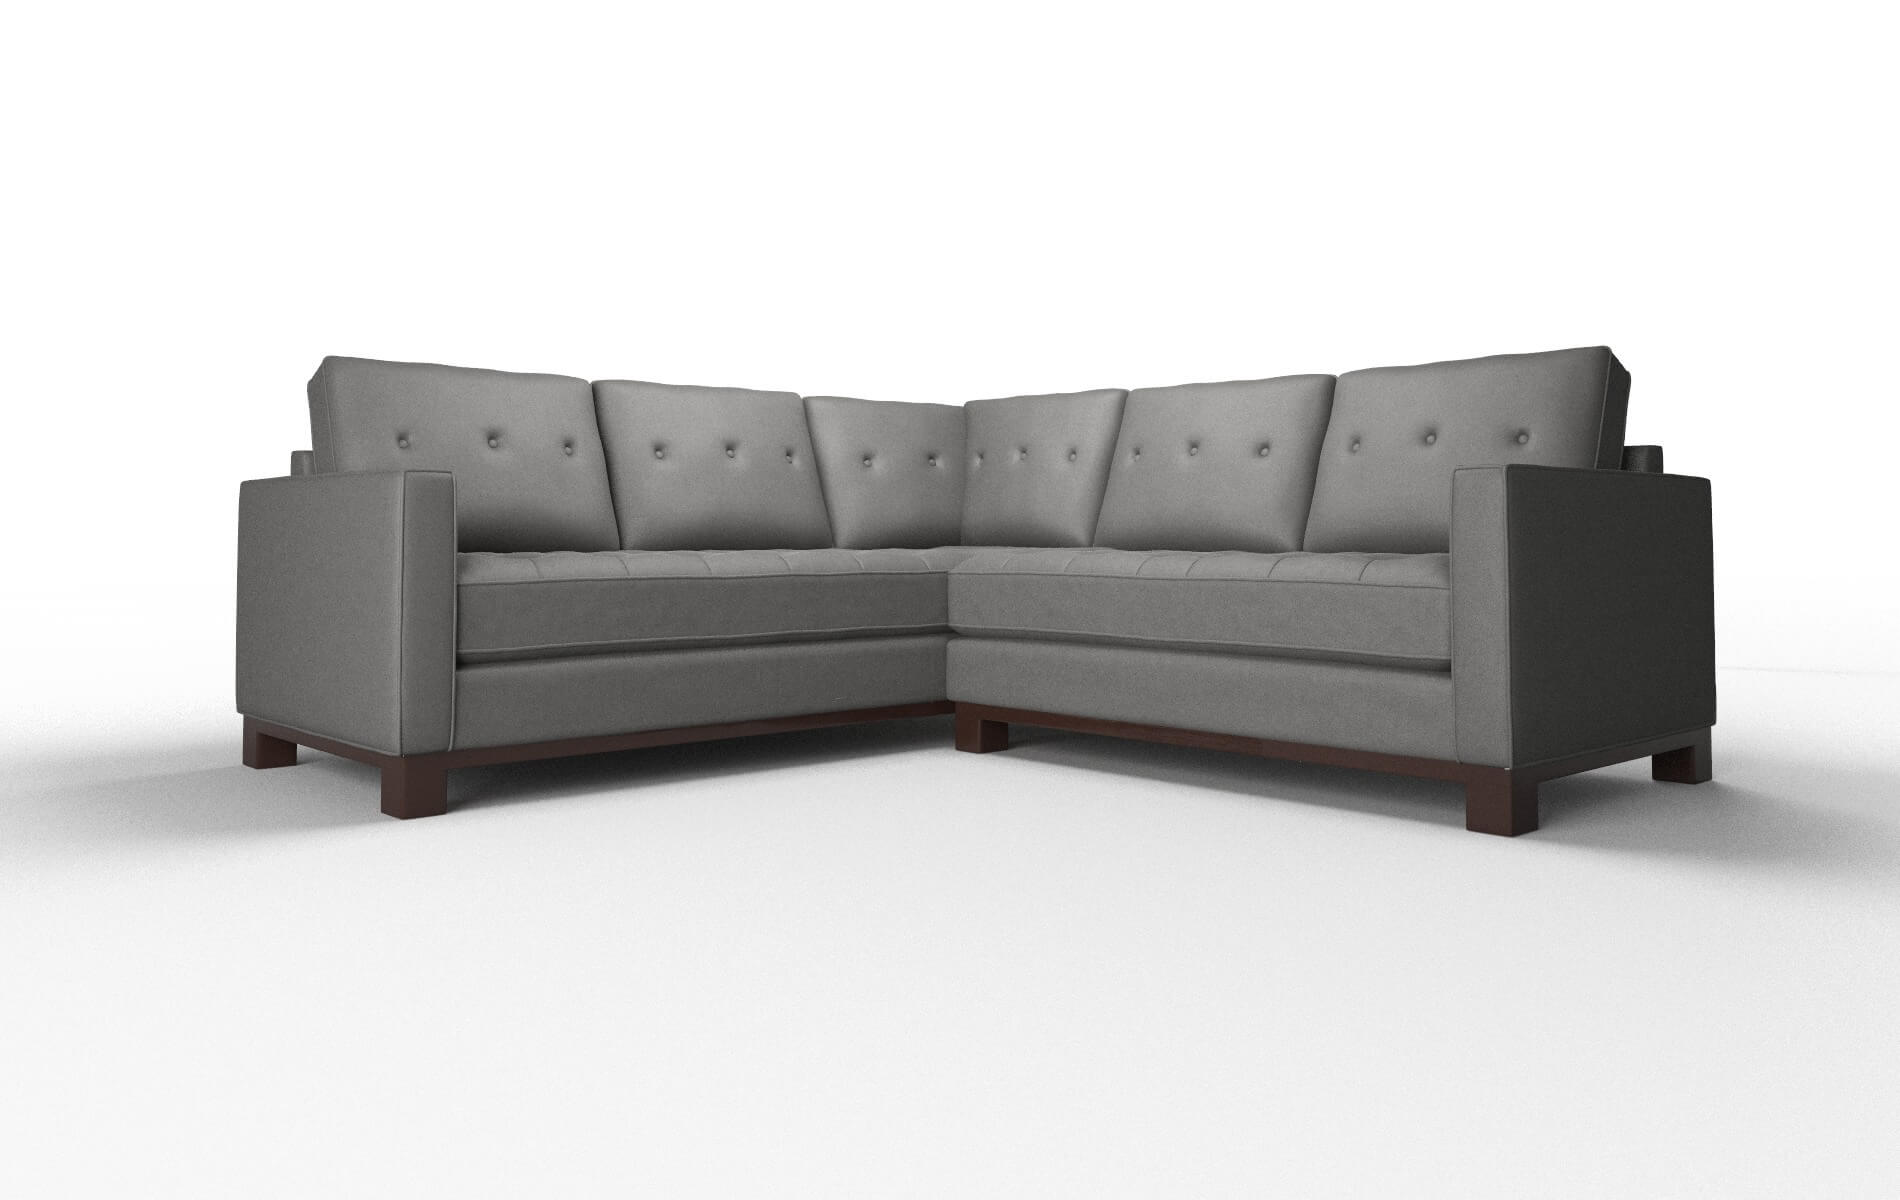 Syros Rocket Charcoal Sectional espresso legs 1